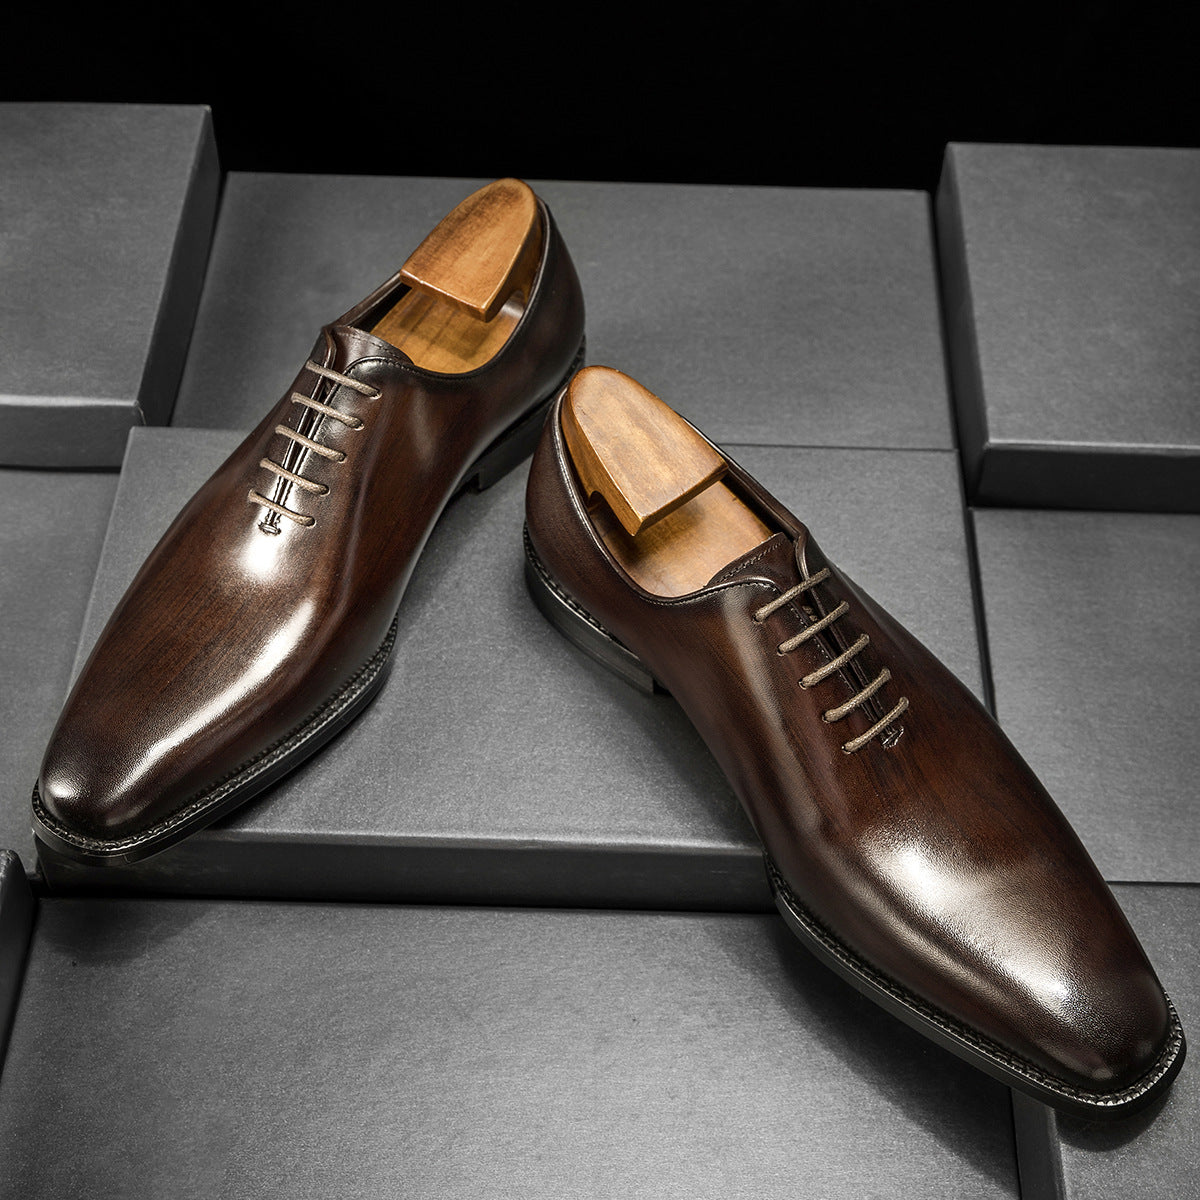 Innovative Men's One-piece Oxford Brushed Business Leather Shoes